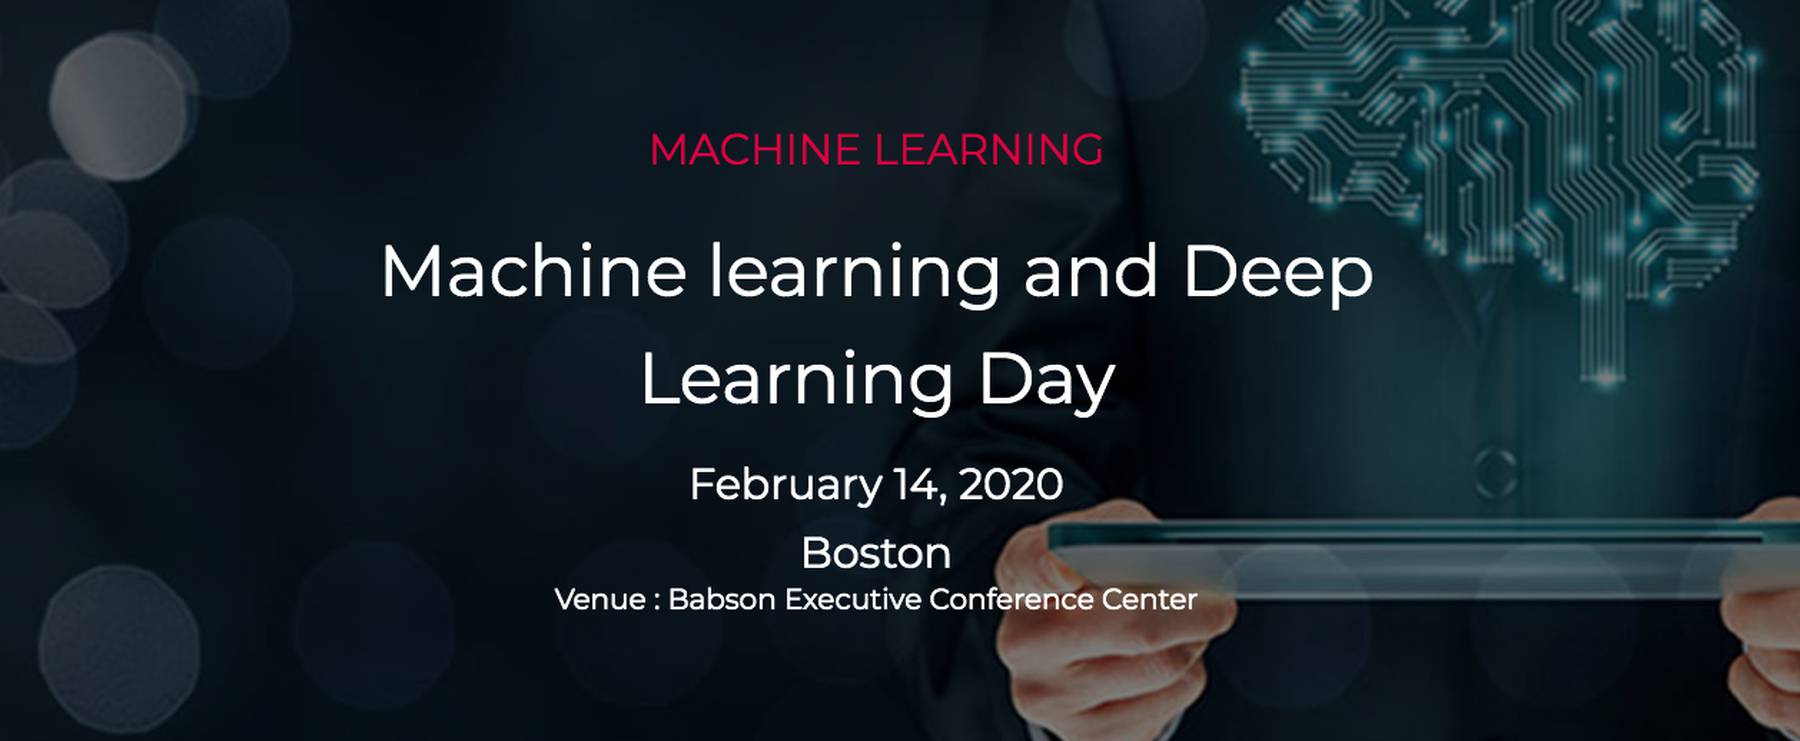 Machine learning and Deep Learning Day Boston 2020